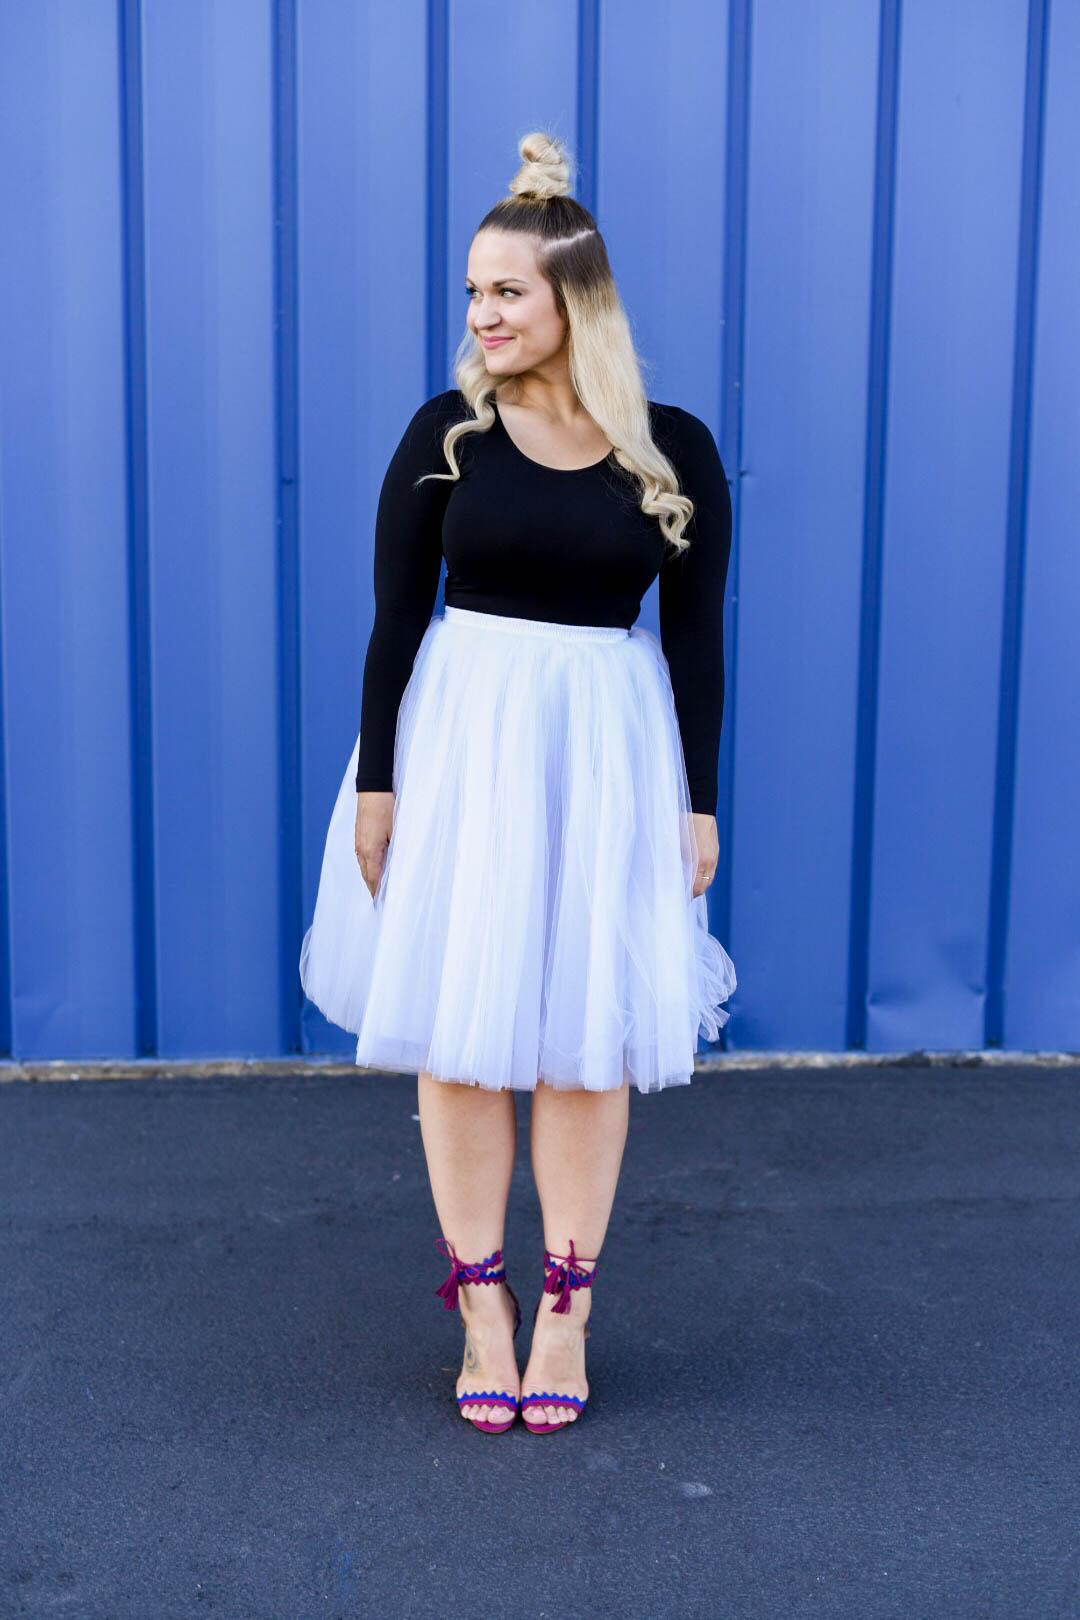 Tulle Skirt Birthday Outfit